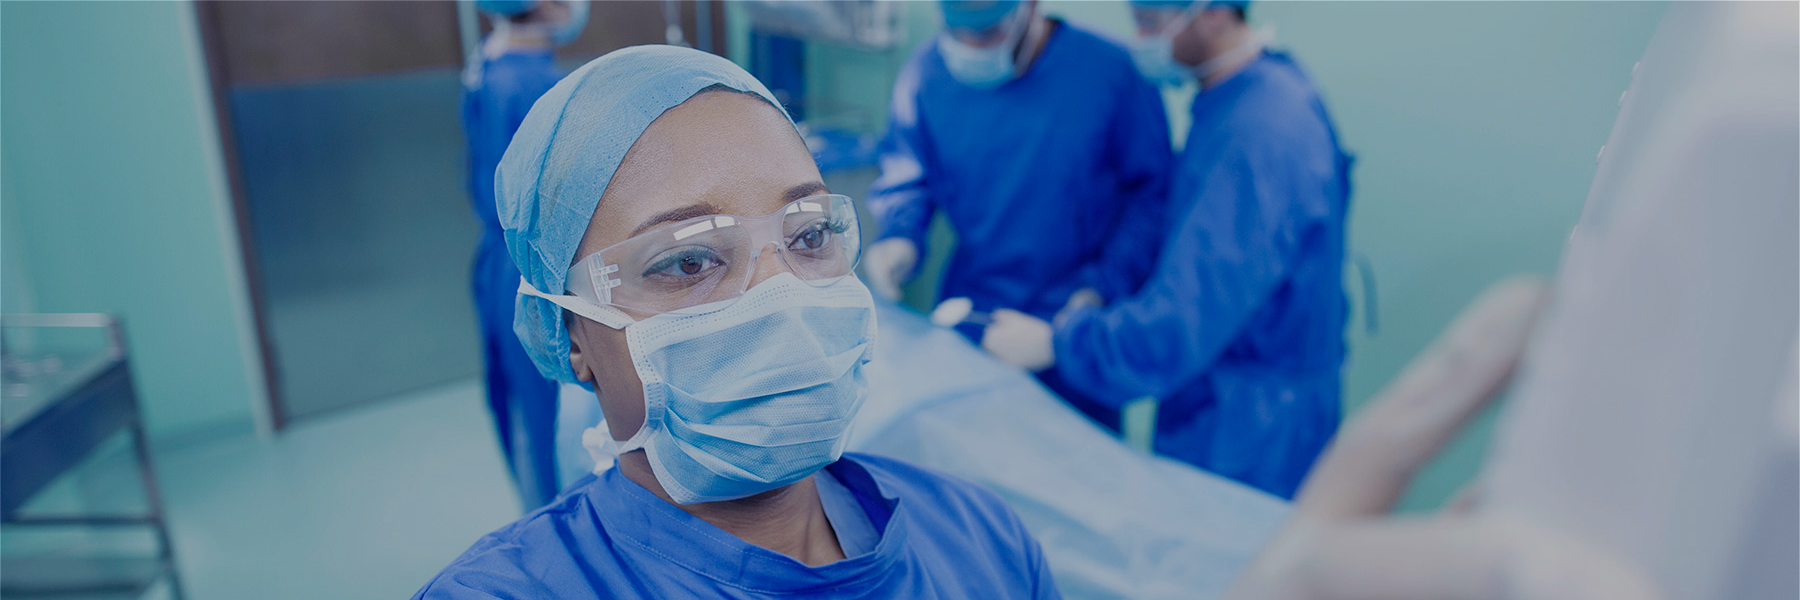 Image of a surgeon in an operating theater with their hand on a medical device 